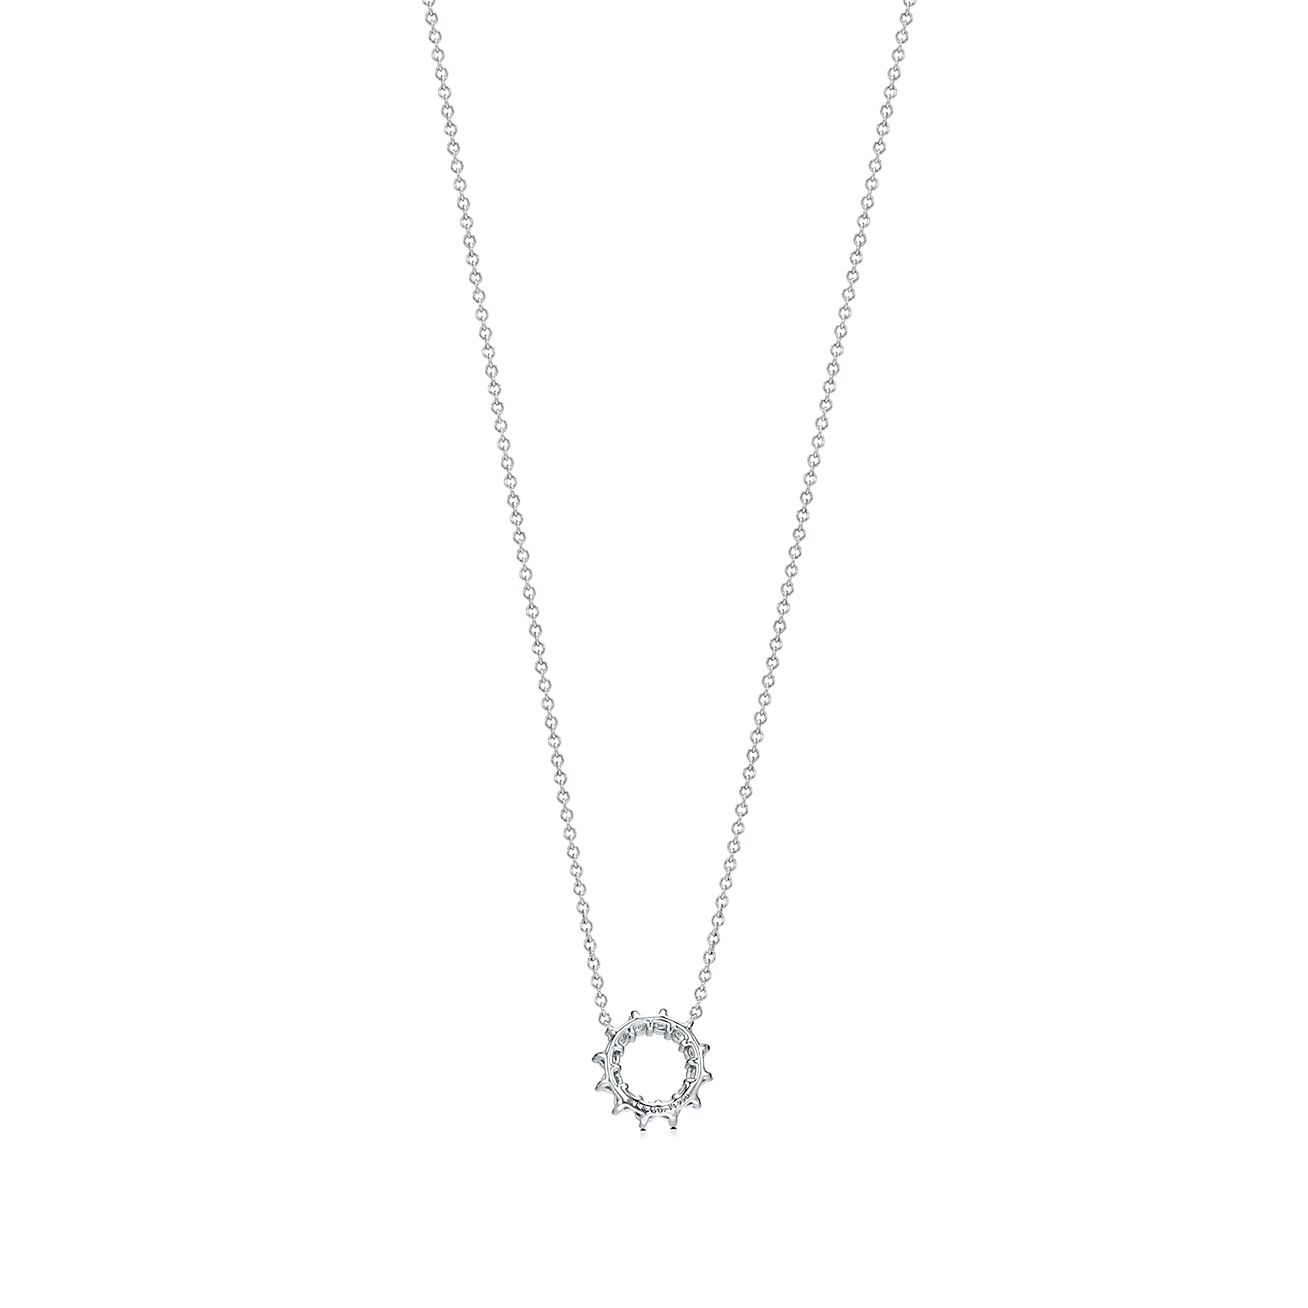 Elsa Peretti for Tiffany & Co. Eternal Circle Necklace – The Verma Group